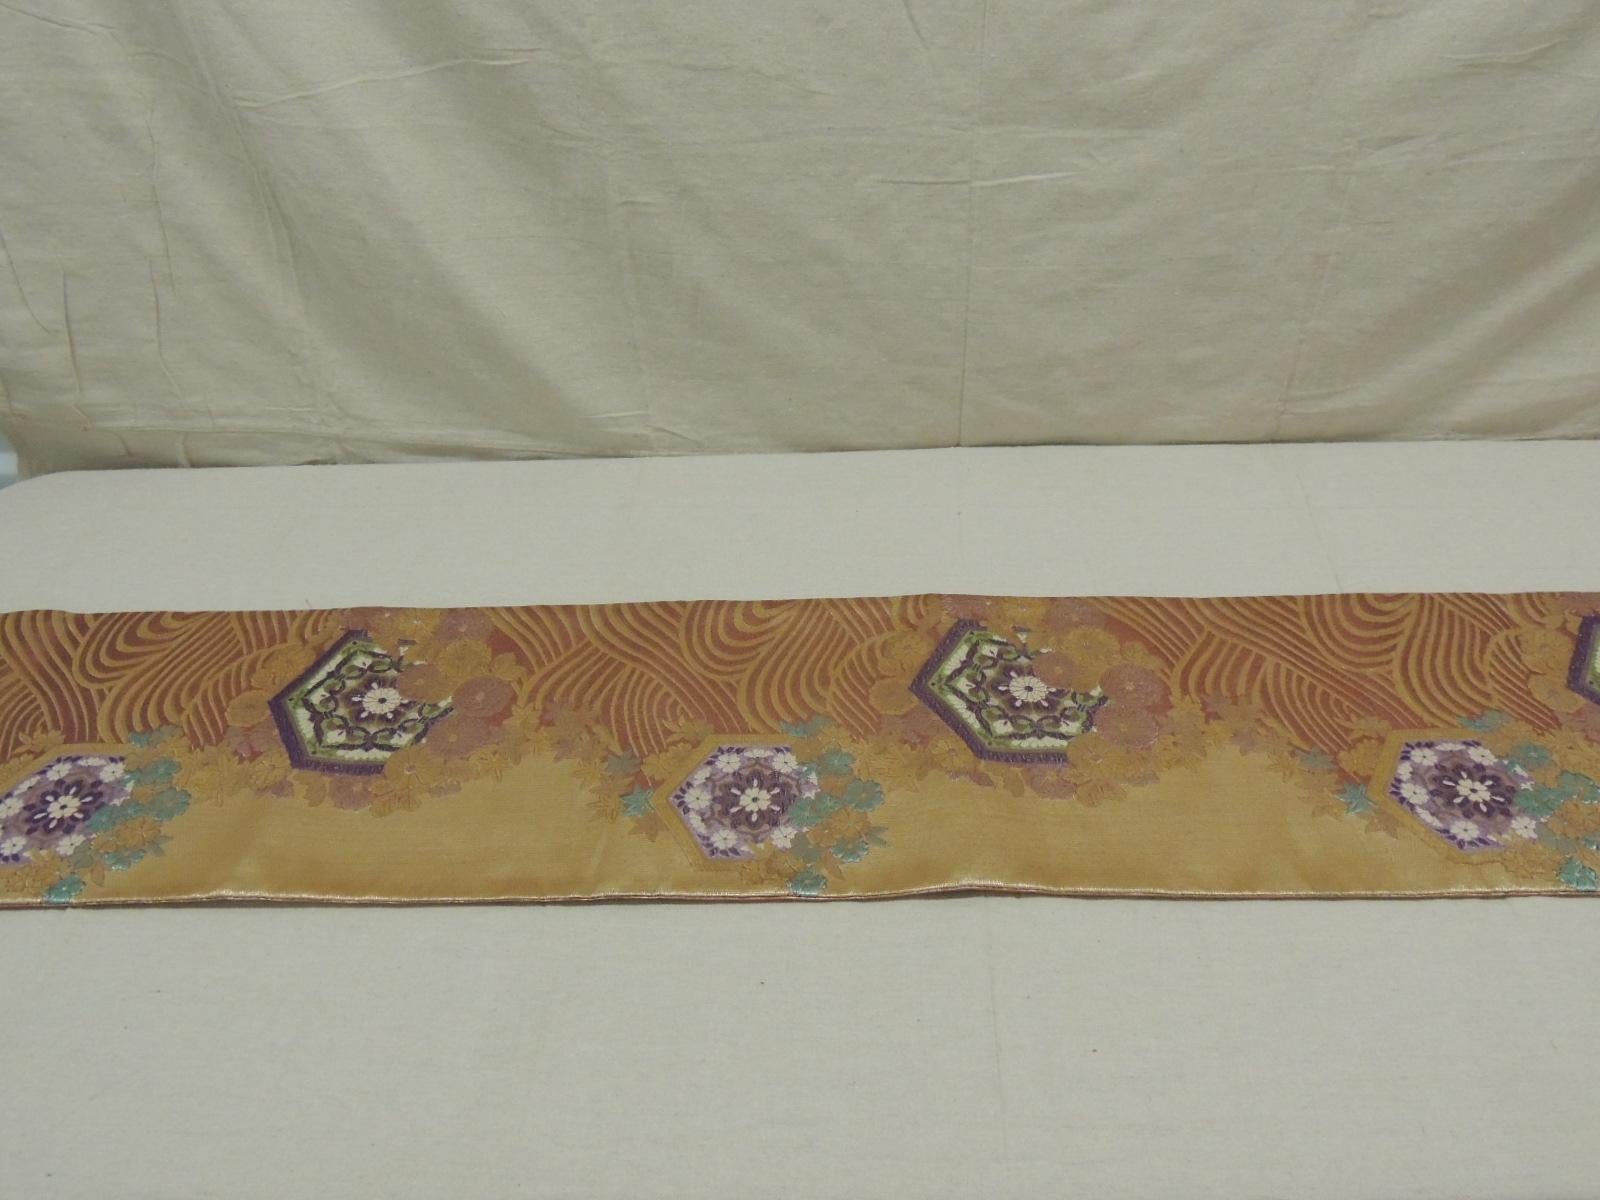 Long Golden Textured Woven Obi Textile Depicting Flowers in Bloom 6